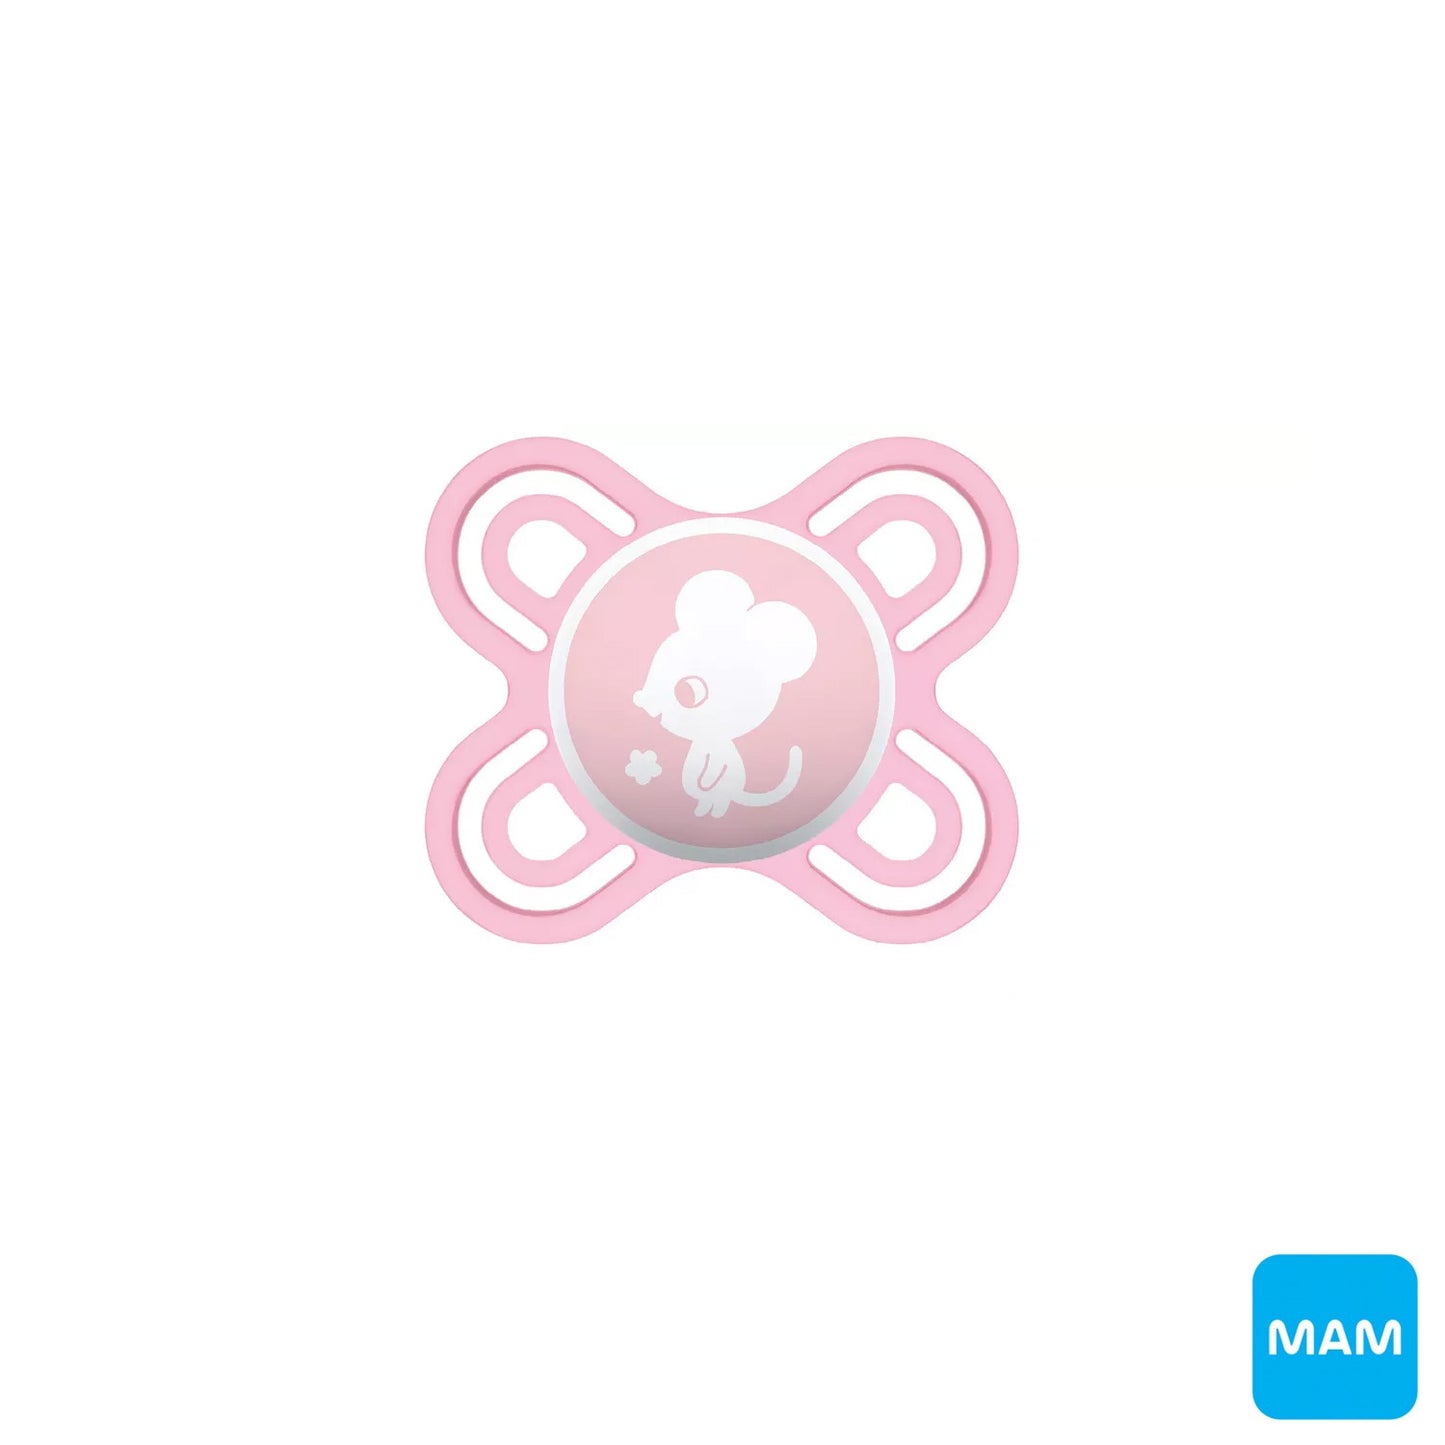 MAM - Perfect Start 0-2m silicone soother